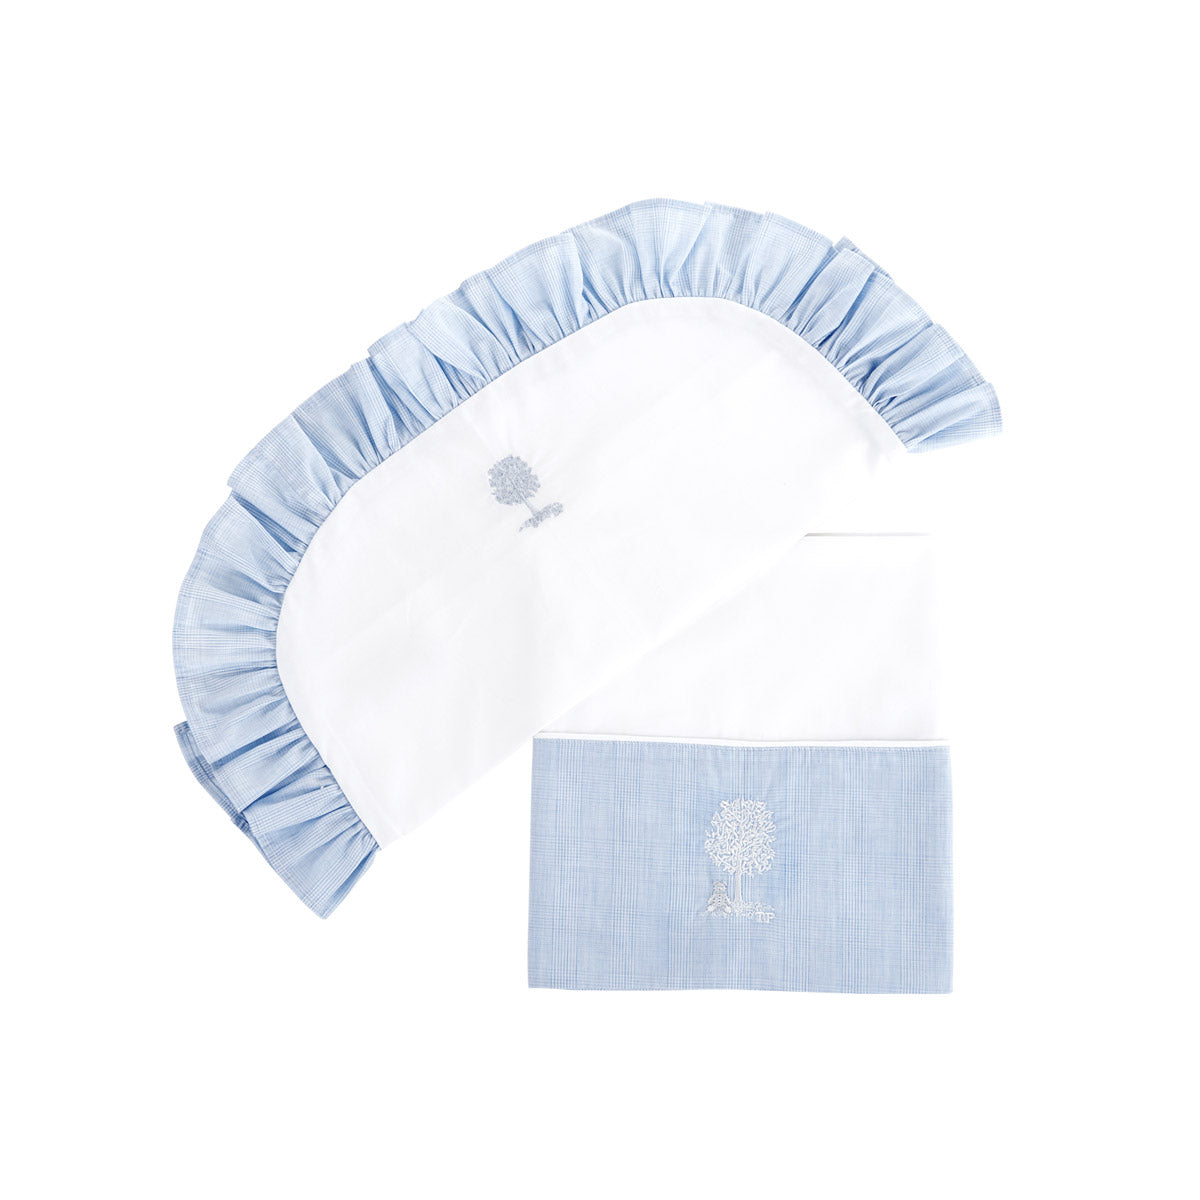 Theophile & Patachou Cradle Sheet and Pillowcase - Sweet Blue